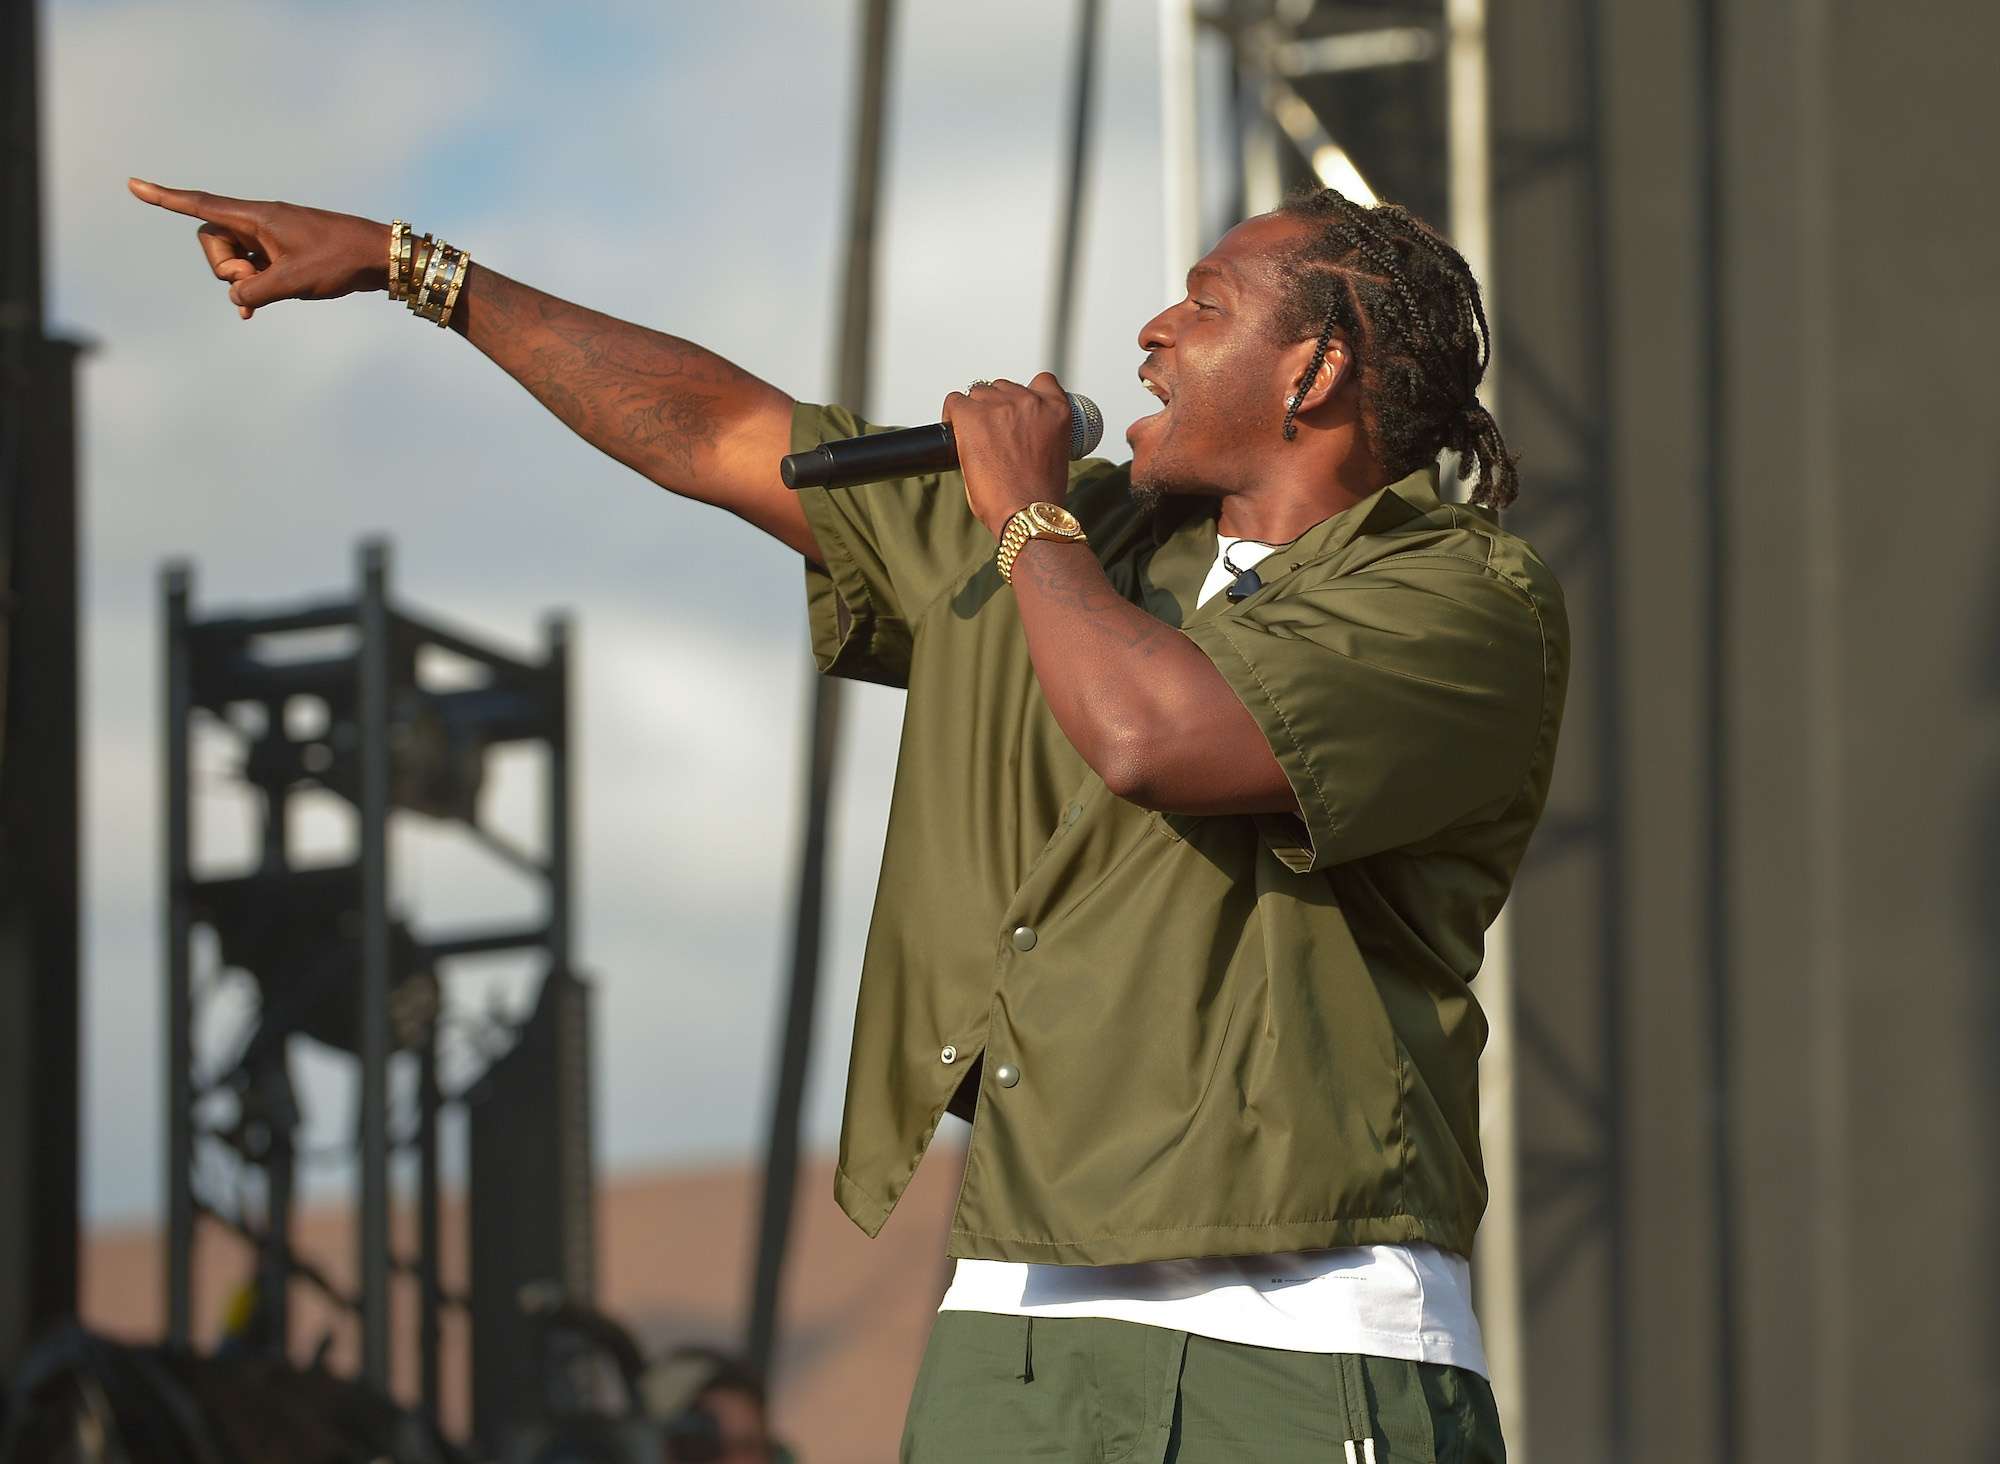 Pusha T Live at Pitchfork [GALLERY] 16